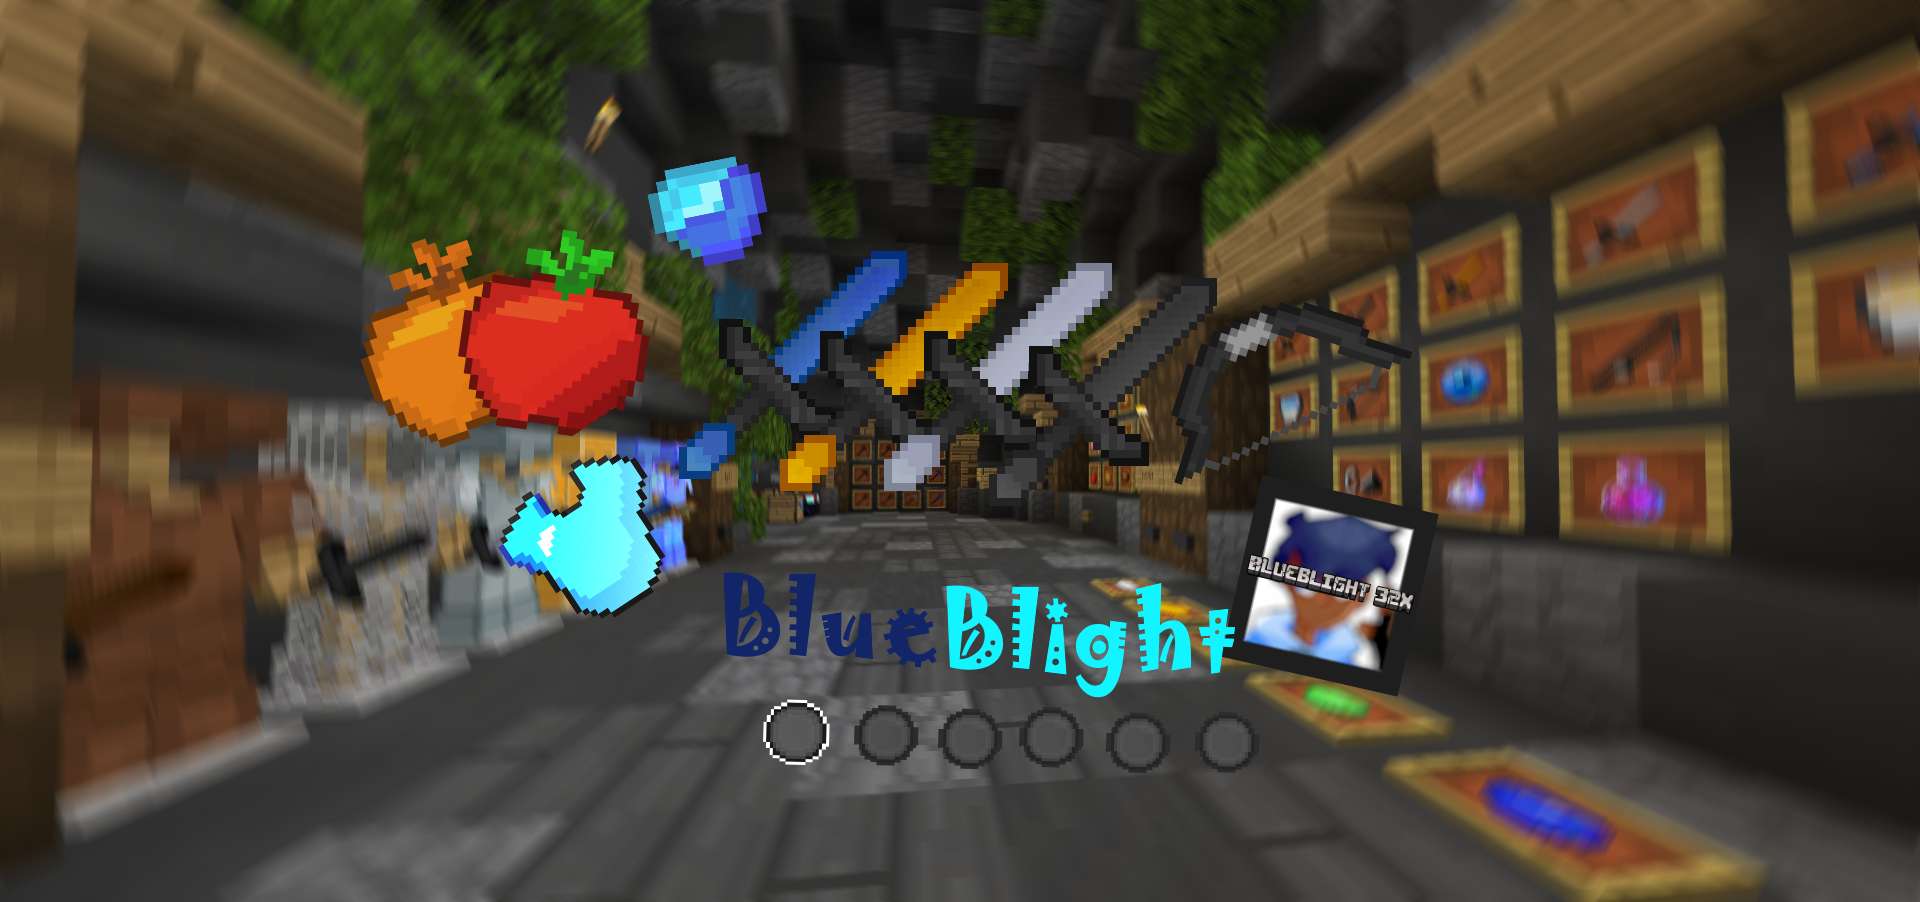 BlueBlight (Blqht 500 special pack) - 32x by ArKAH & This pack was made for Blqht (500 sub special) he helped me with tips for the textures on PvPRP